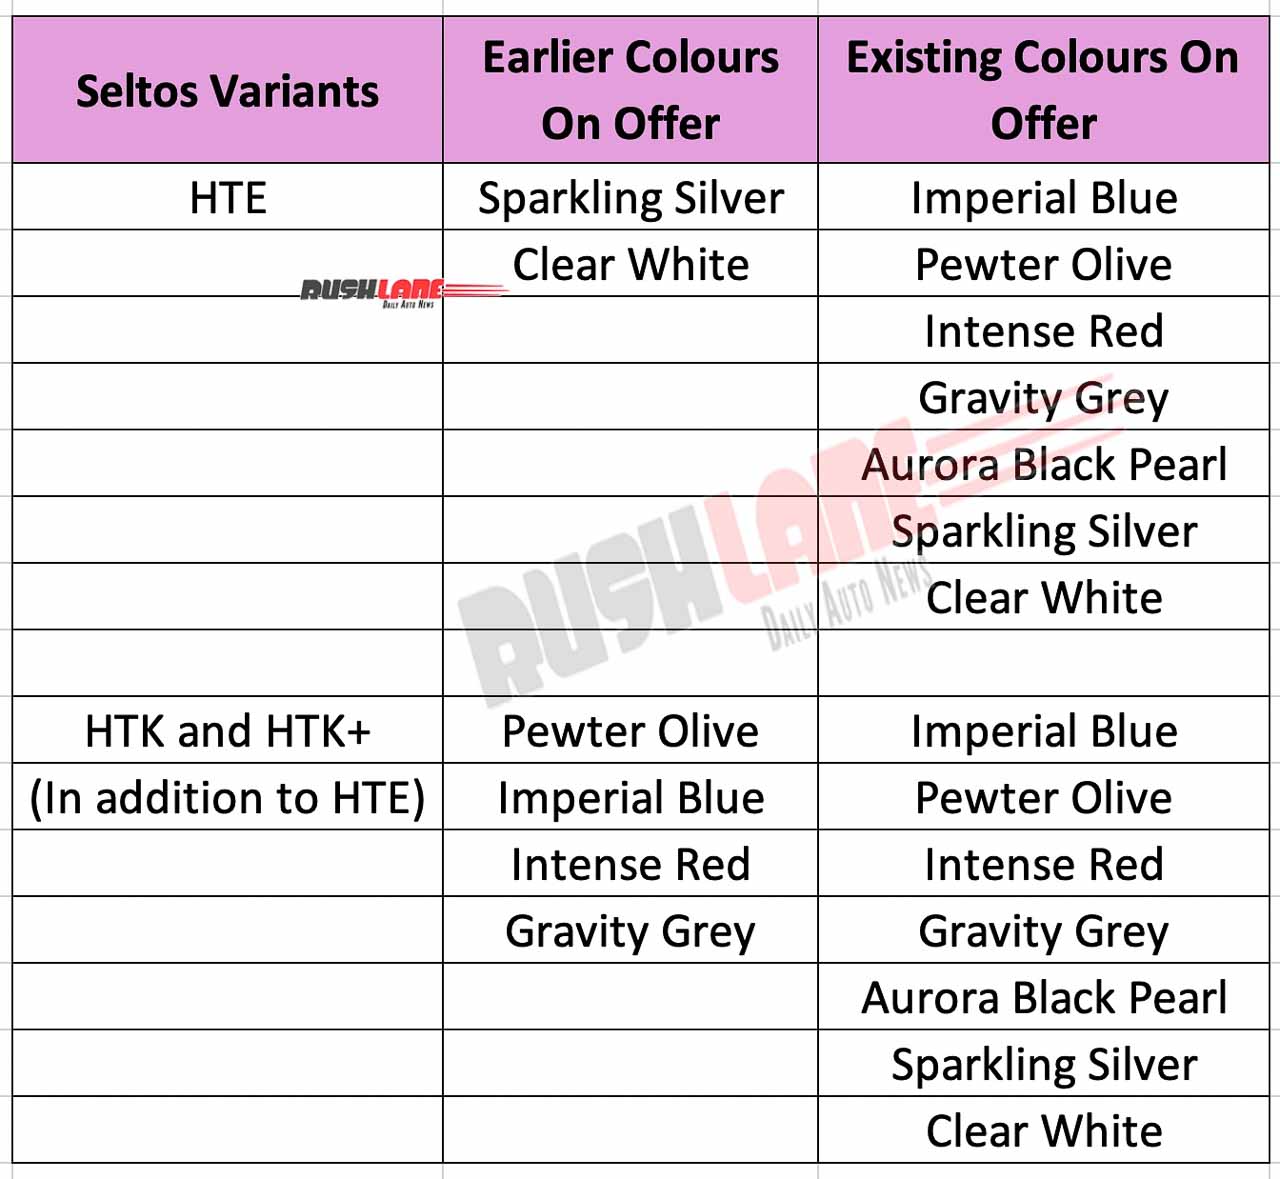 Seltos base variants get new colours added